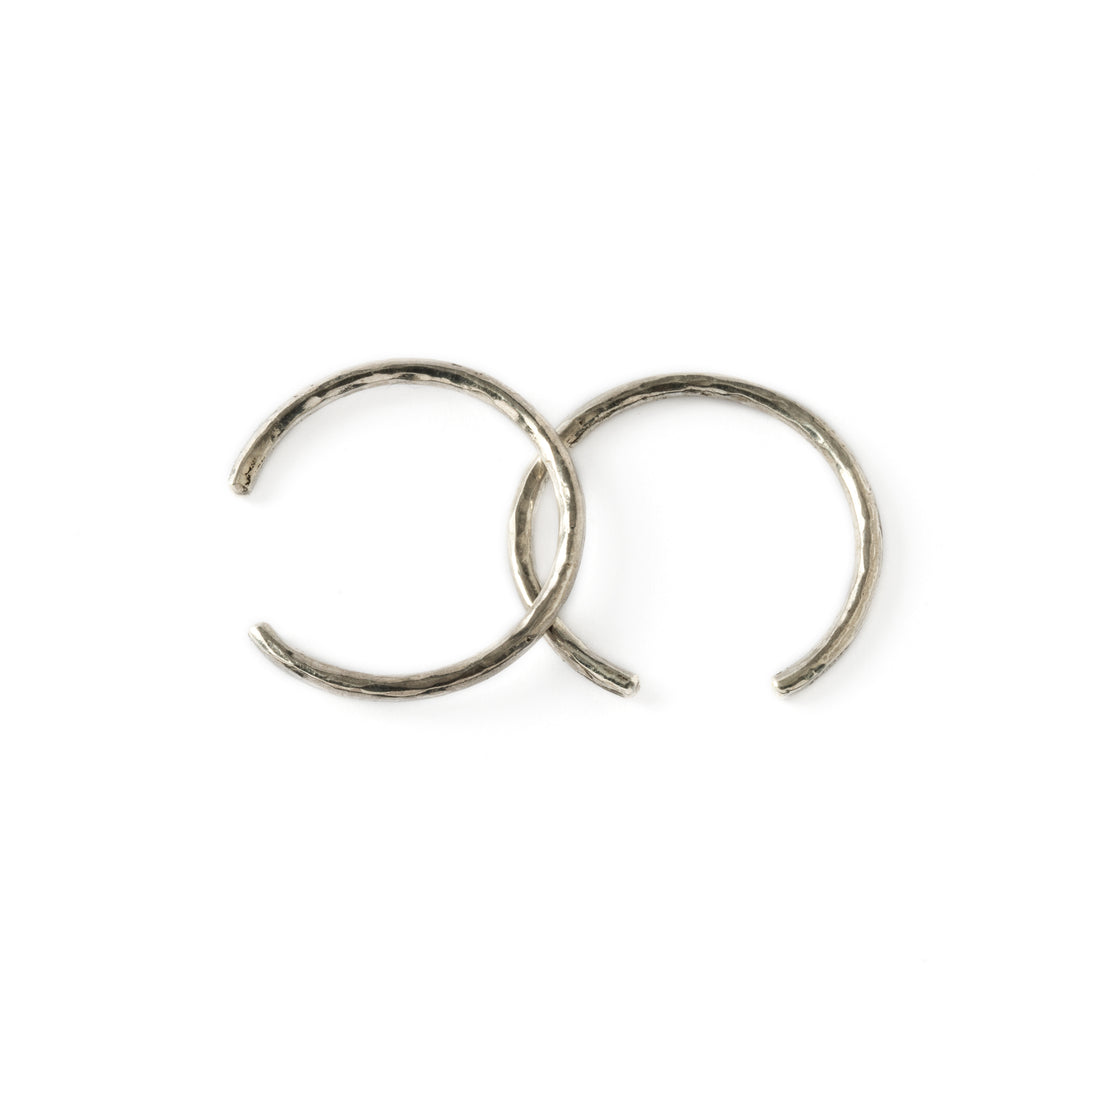 Hammered silver horseshoe earrings front and side view